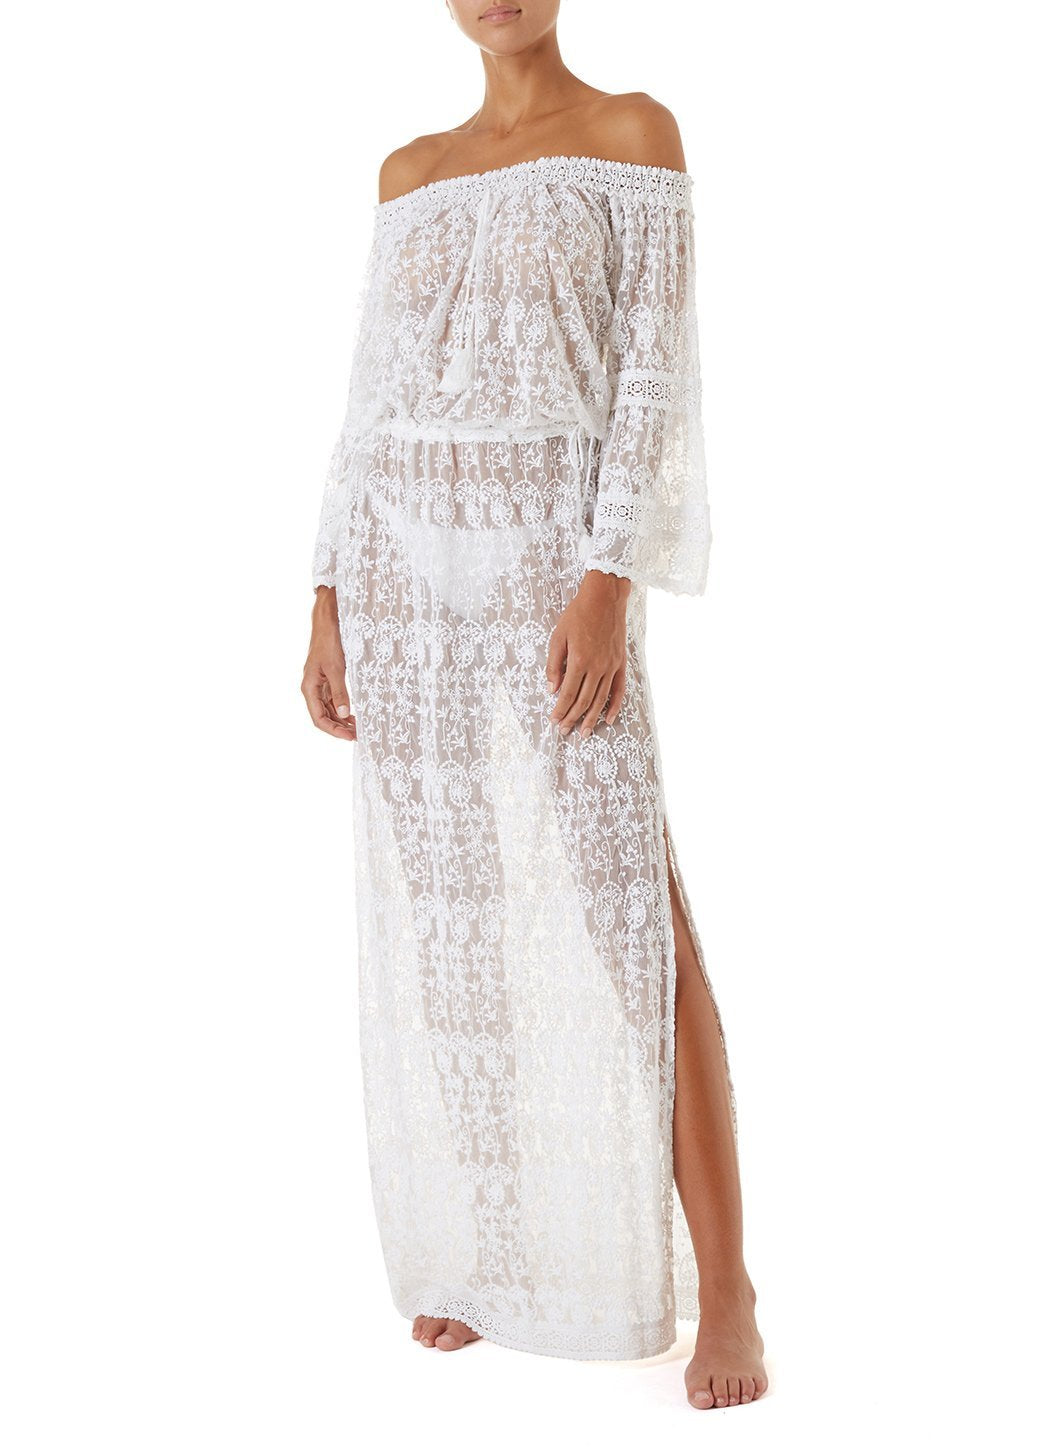 sabina white embroidered offtheshoulder maxi dress 2019 F_2